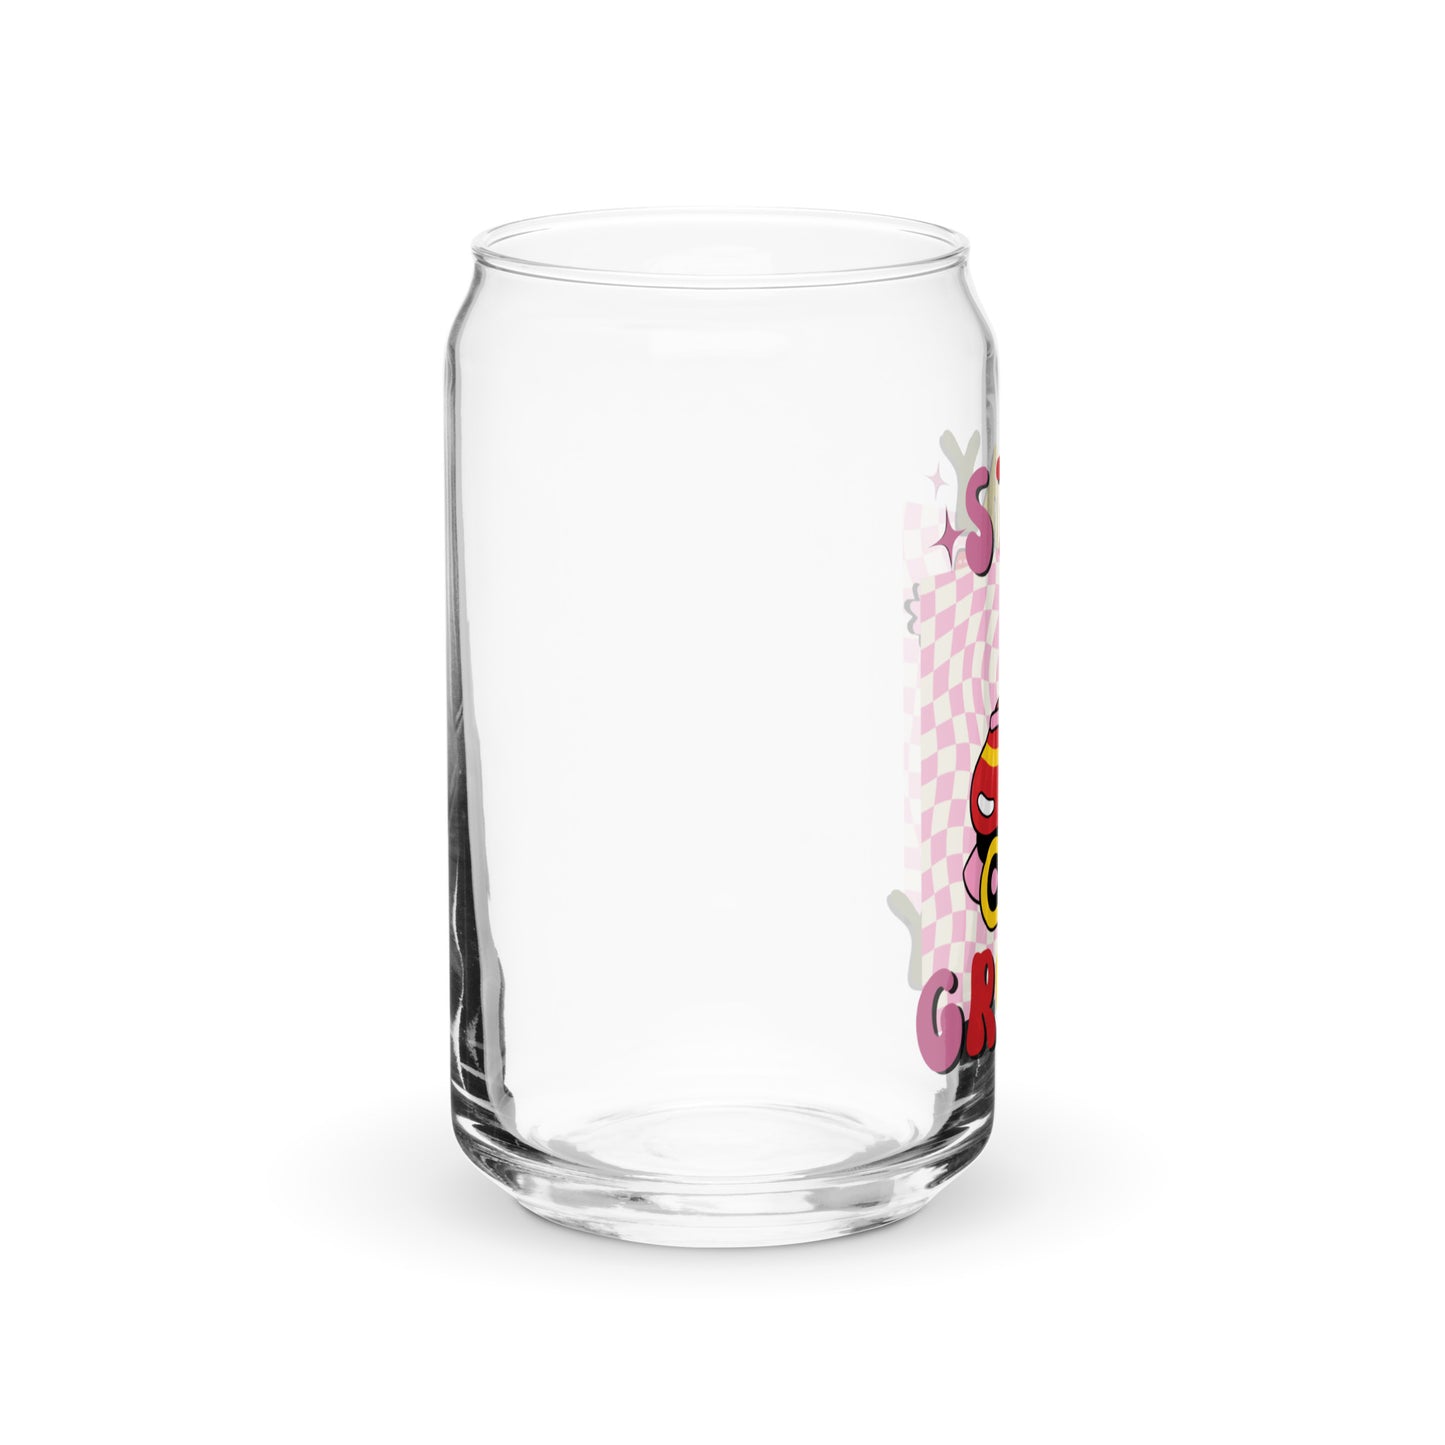 Stay Groovy Can-shaped glass